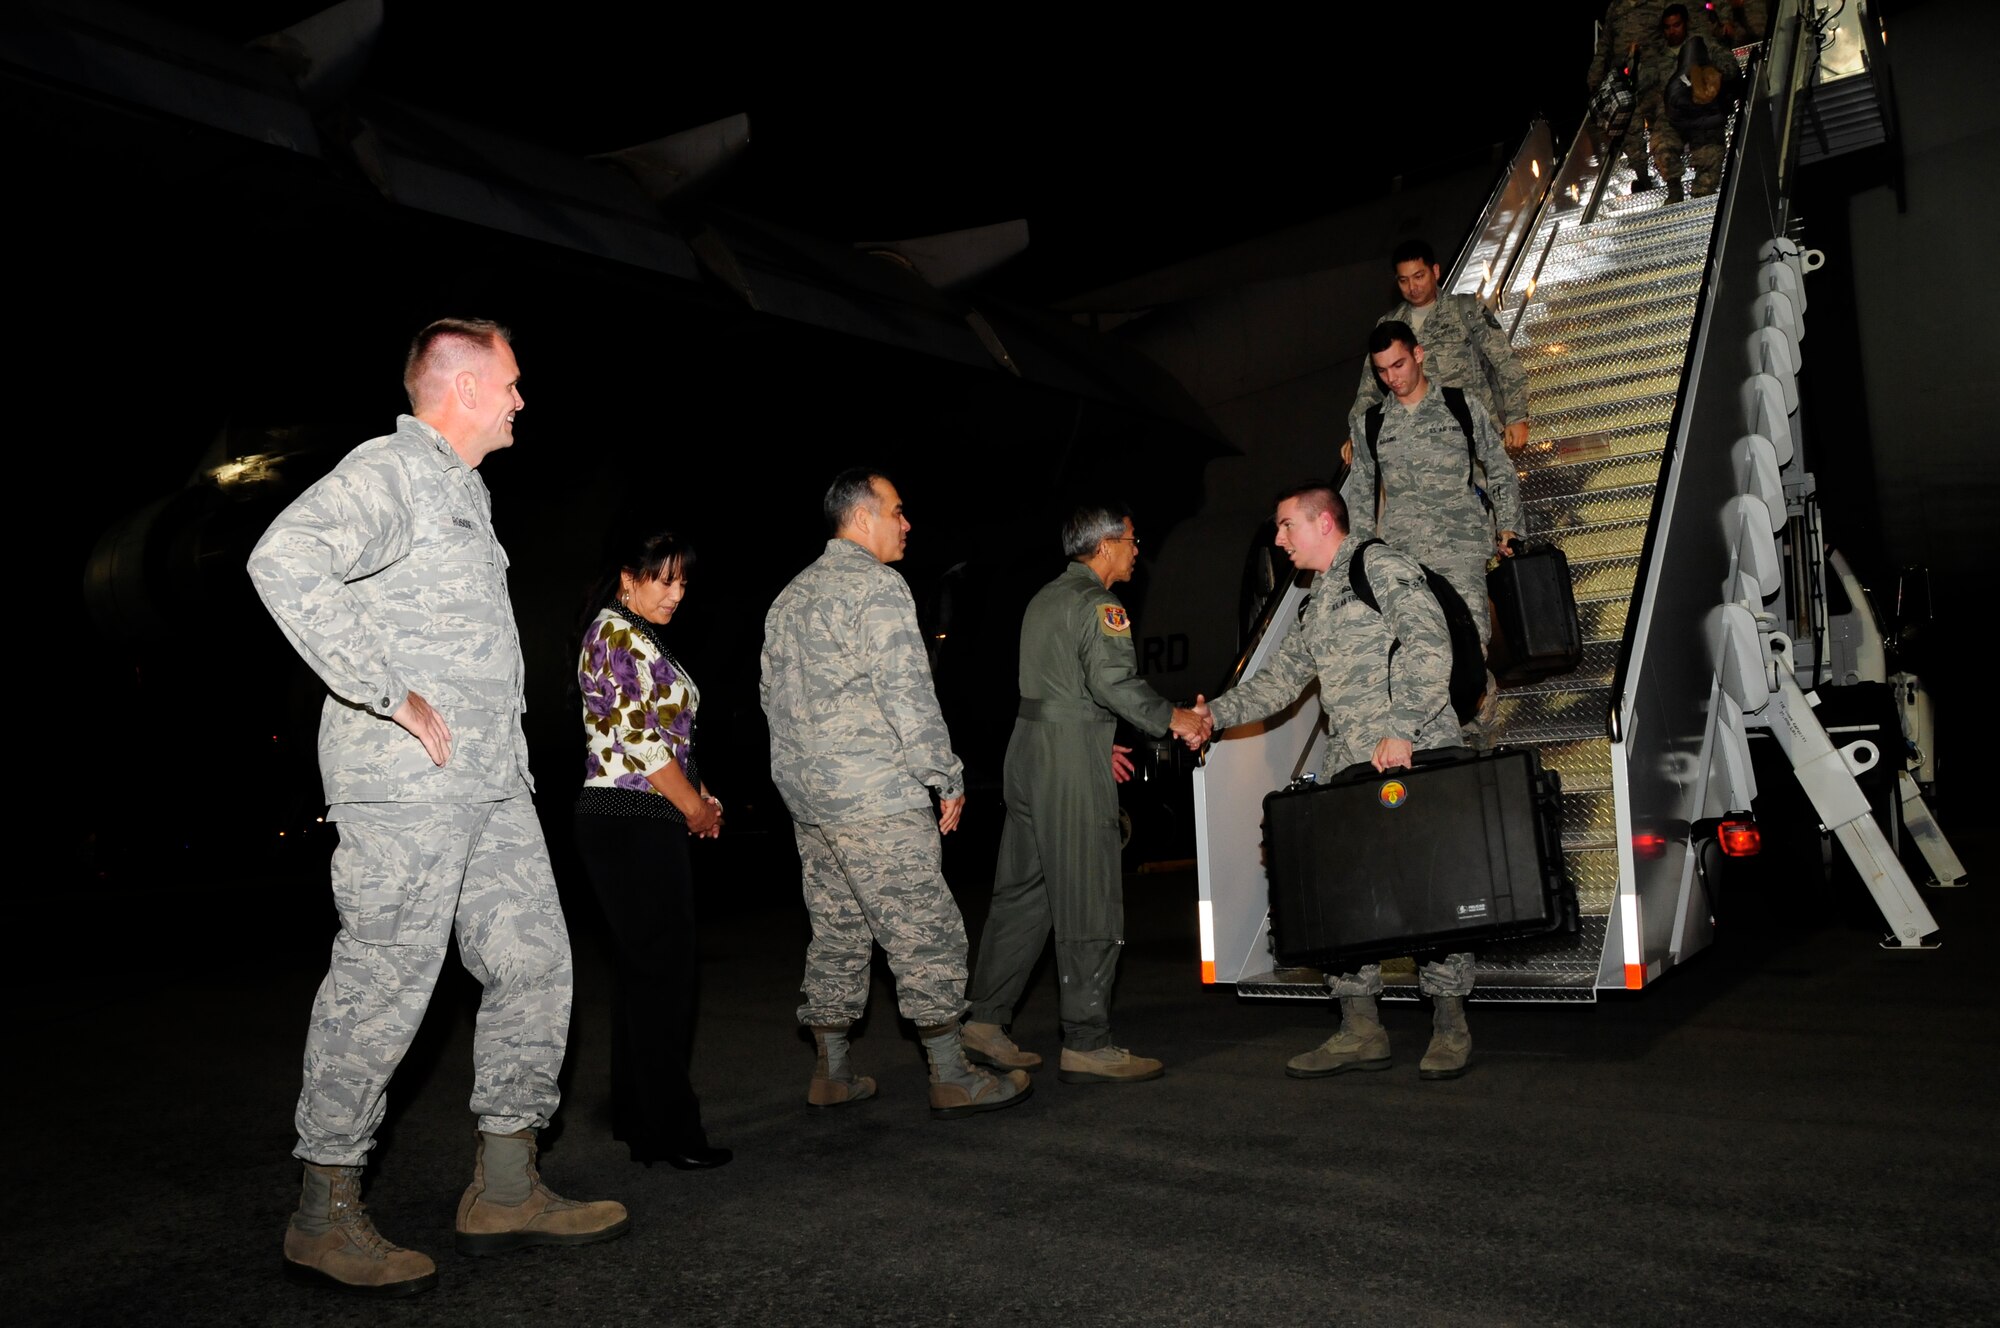 Col. John Roscoe, 15th Wing commander, Brig. Gen. Braden Sakai, 154th Wing, Hawaii Air National Guard, commander, and his wife, along with Maj. Gen. Darryll Wong, state adjutant general, welcome maintainers from the 15th Wing and 154th Wing, Air National Guard, back from Red Flag 13-2 on Feb. 2, 2013. An integrated team of 152 active duty, HIANG and contracted personnel contributed to the successful completion of the two-week Red Flag exercise at Nellis Air Force Base, Nevada, as part of the Hawaiian Raptor’s first over-water deployment. (Air National Guard photo/Senior Master Sgt. Kristen M. Stanley)